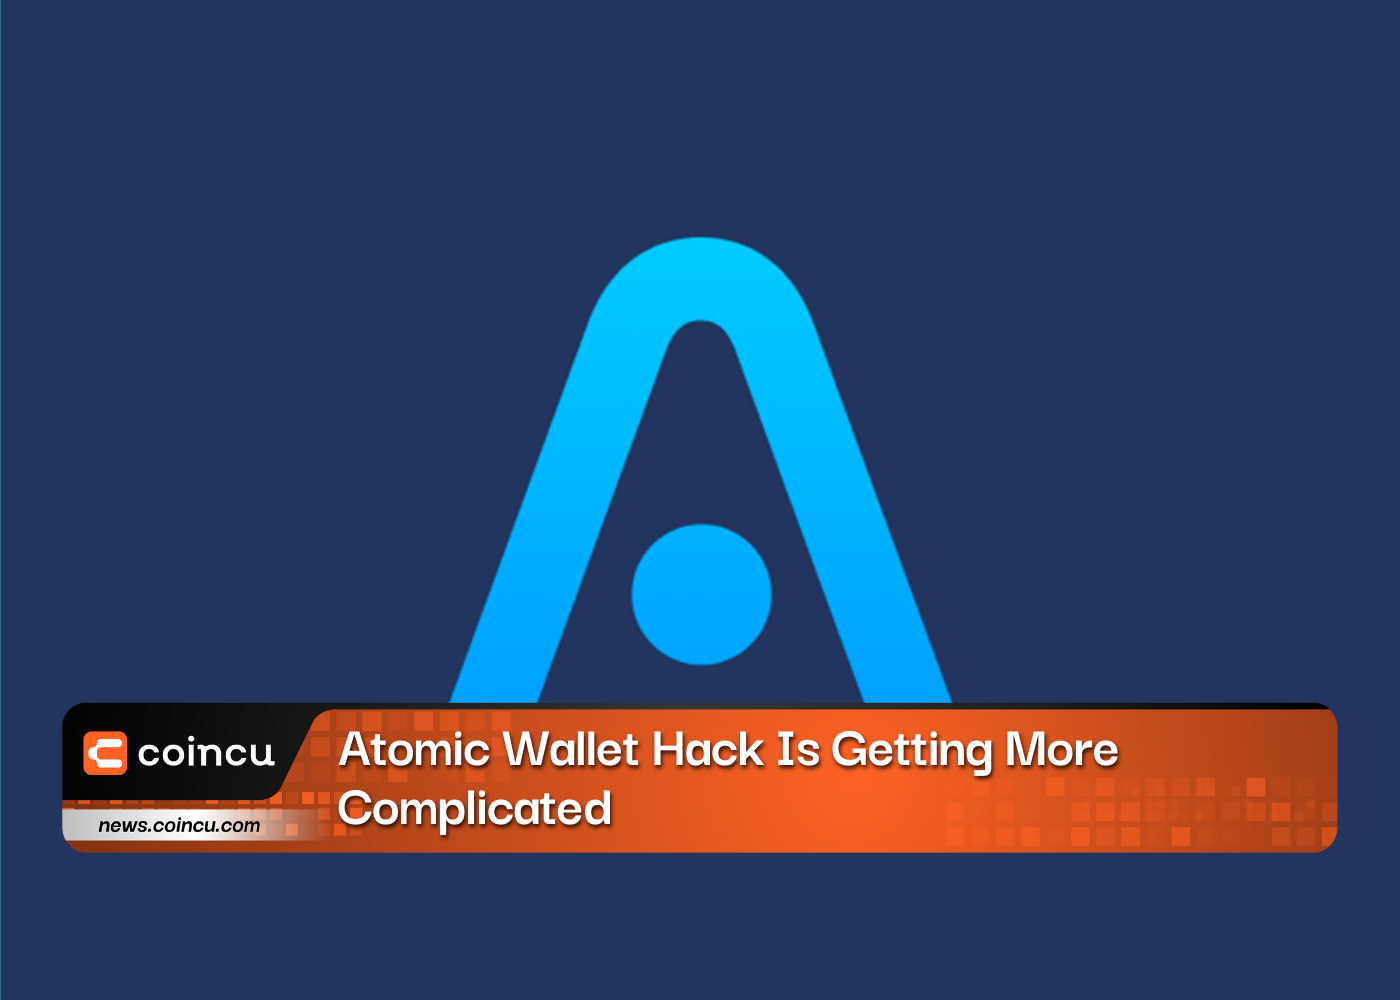 Atomic Wallet Hack Is Getting More Complicated